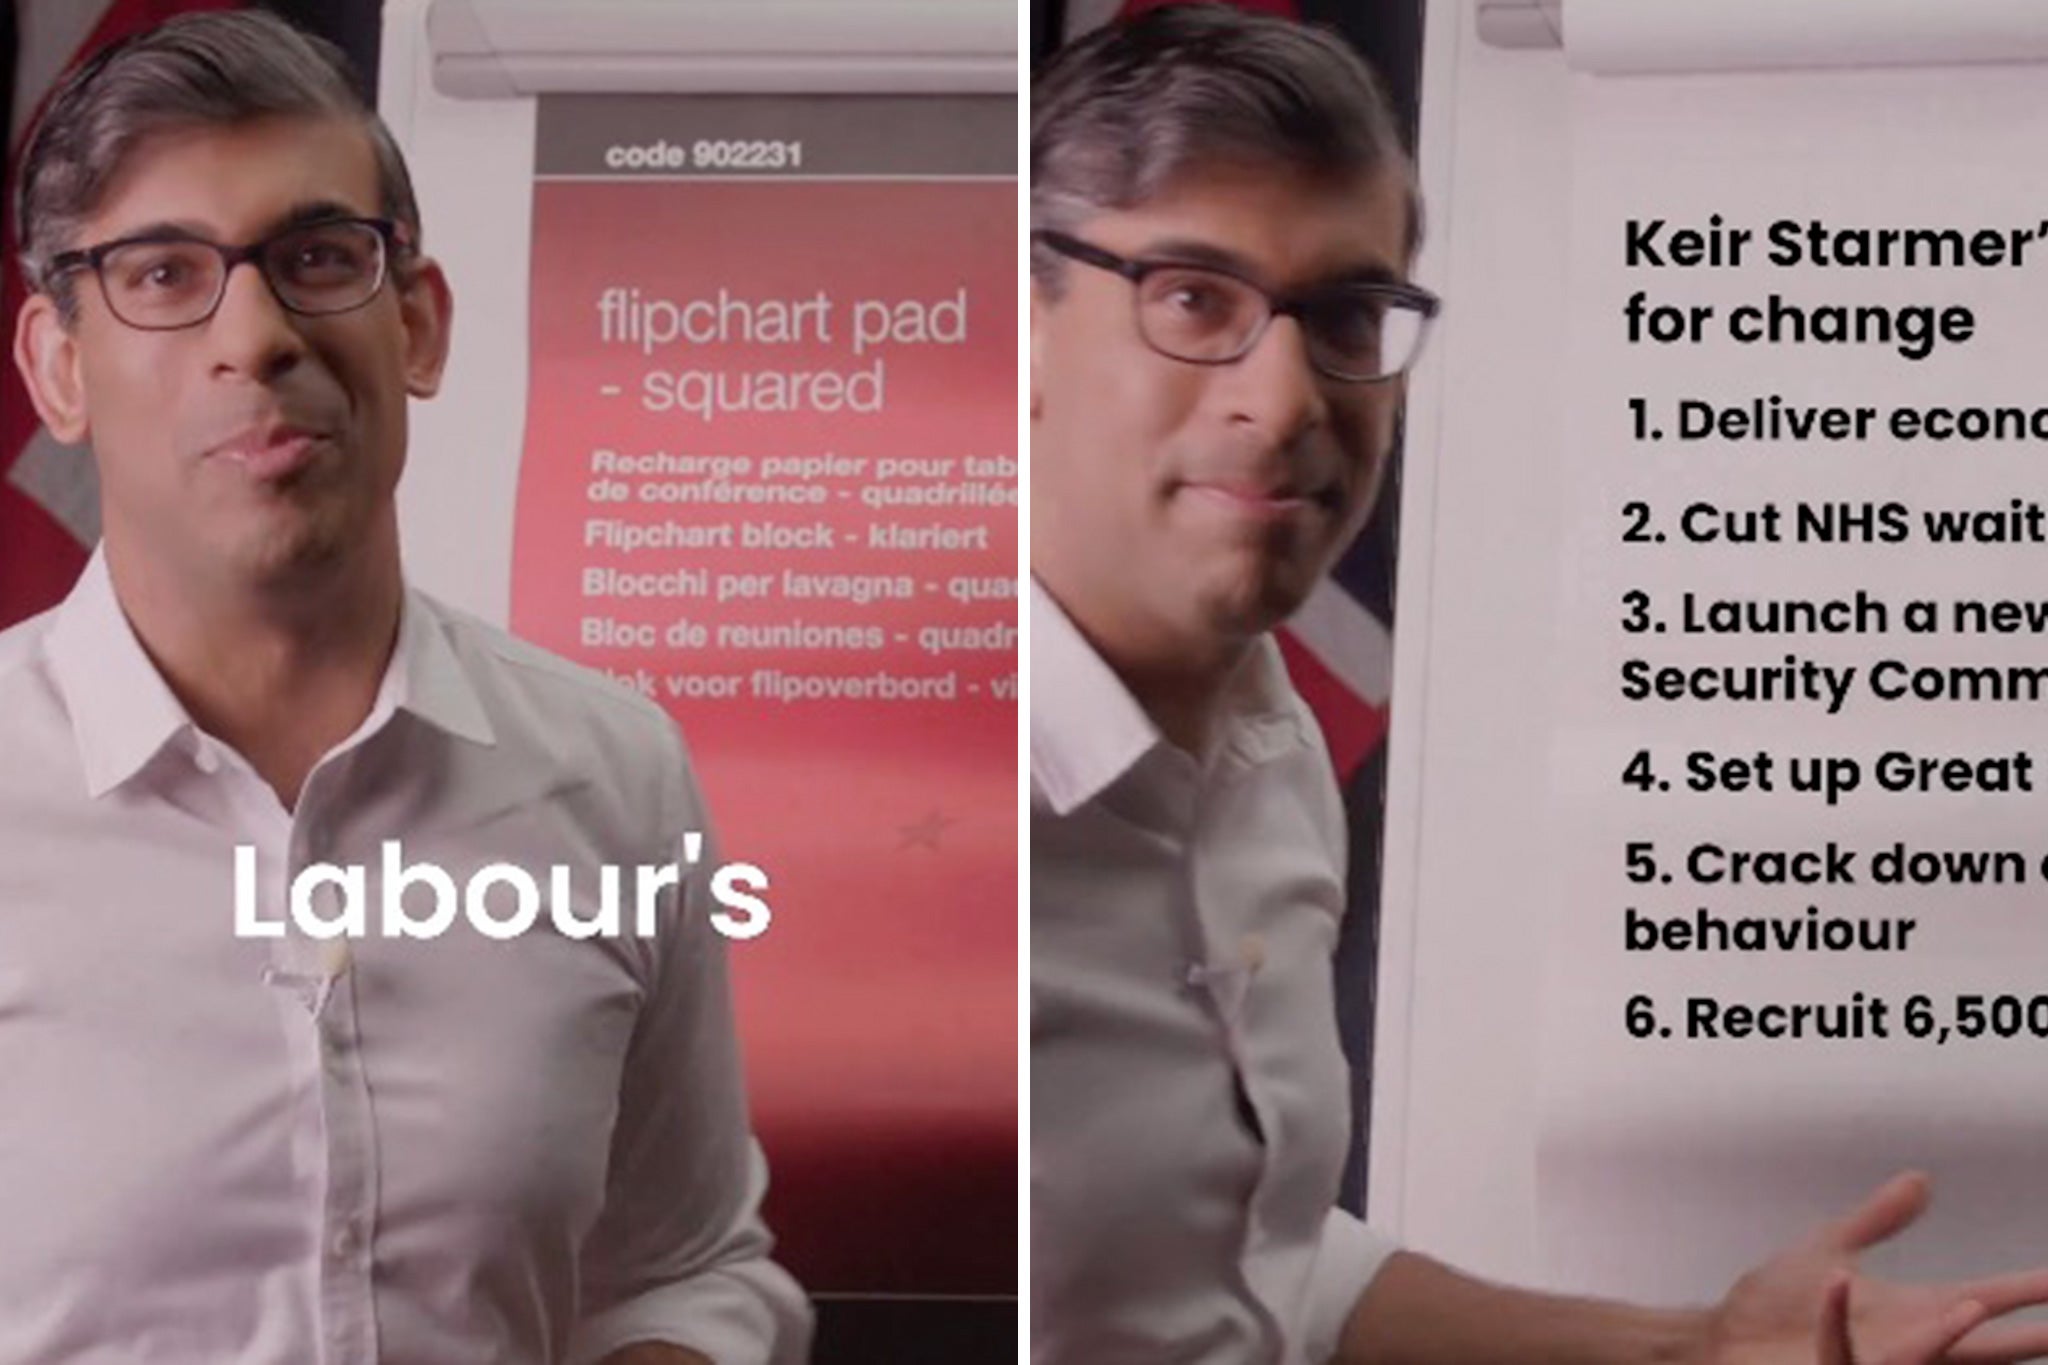 The Labour Party posted an edited version that showed Sir Keir Starmer ’s ‘first steps for change’